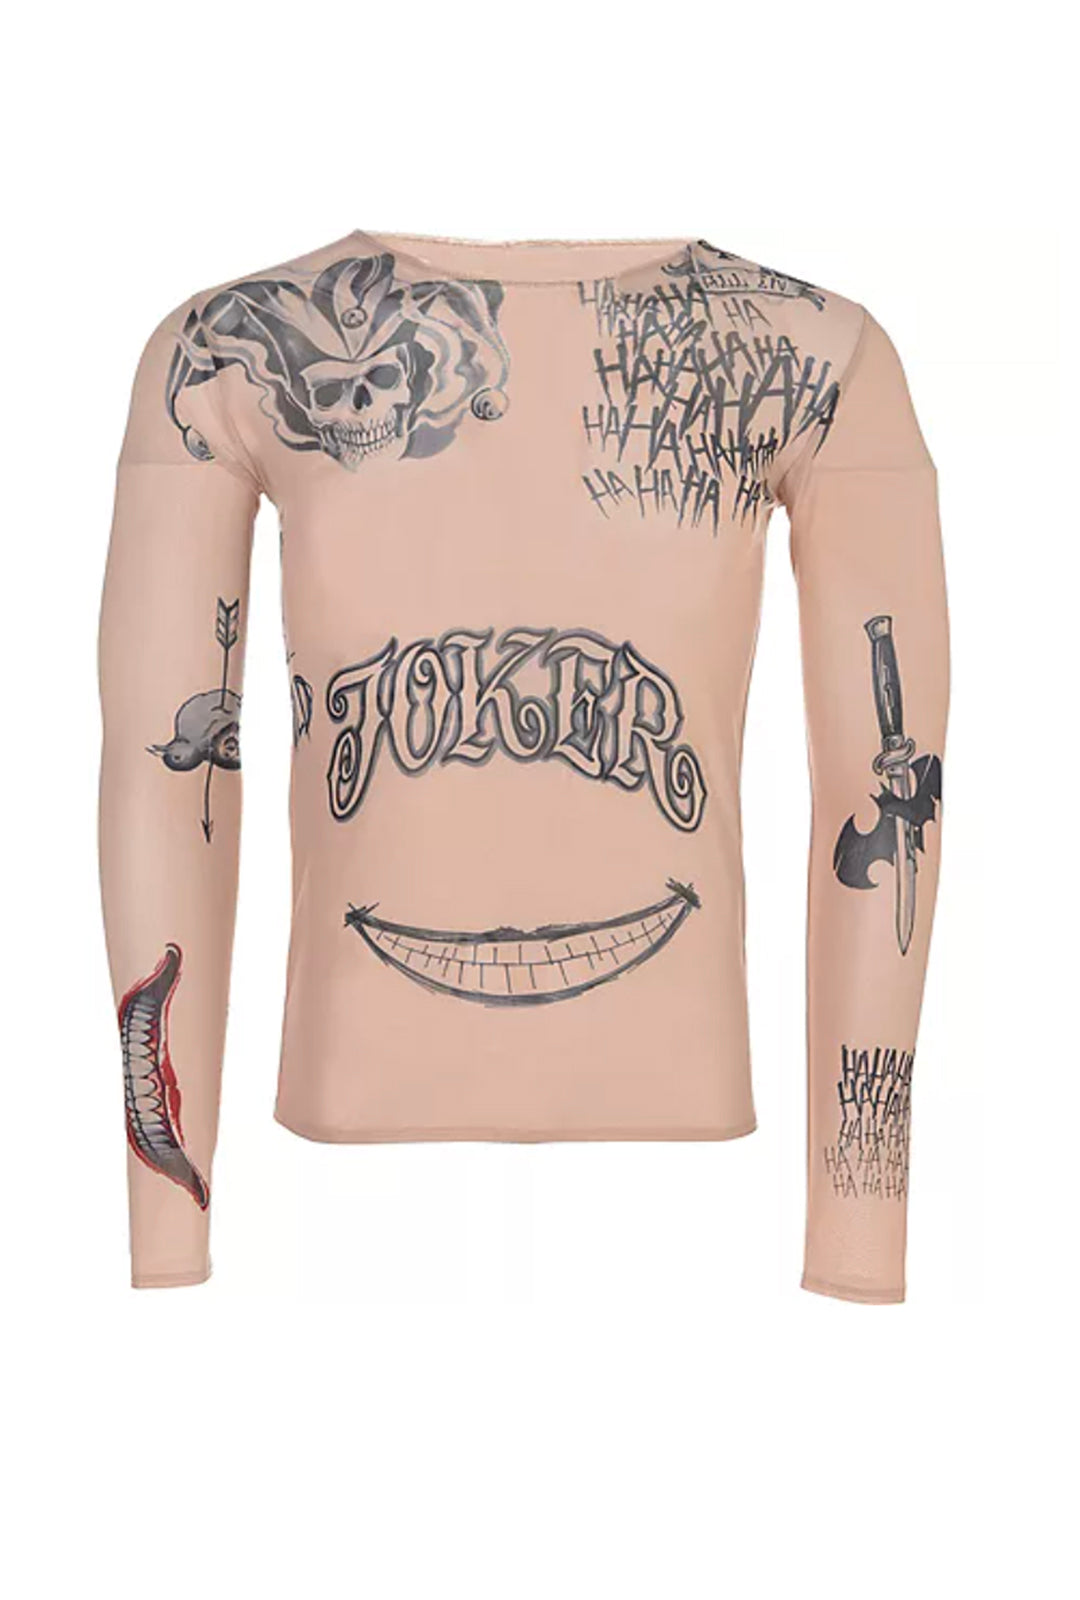 SUIT YOURSELF Suicide Squad Long-Sleeve Tattoo Joker Shirt for Adults, One  Size up to Men's Size 40-42, Features Tattoos : Amazon.sg: Fashion